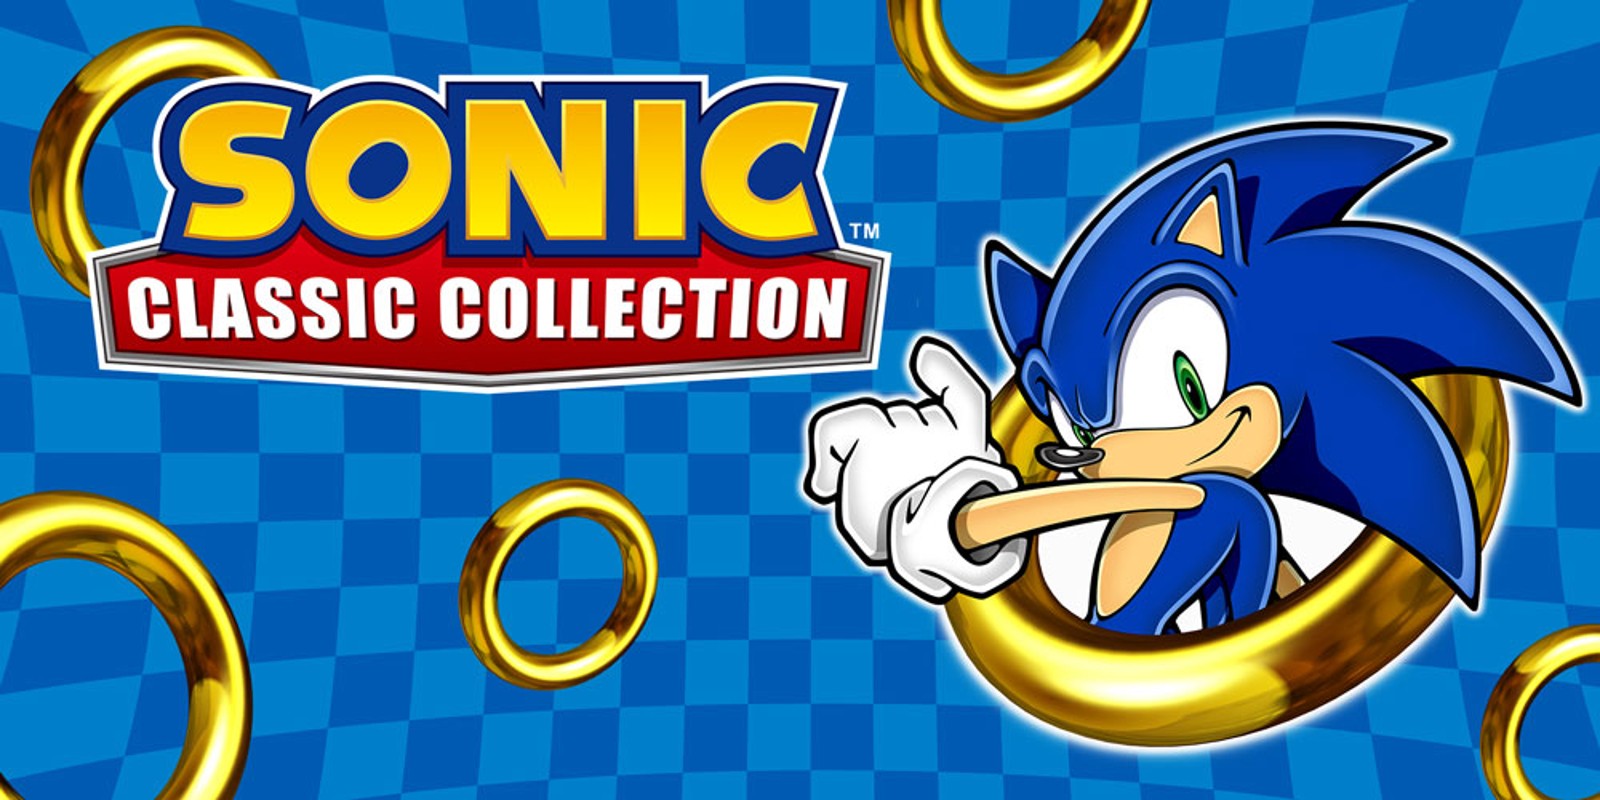 Sonic Classic Collection | Nintendo DS | Games | Nintendo